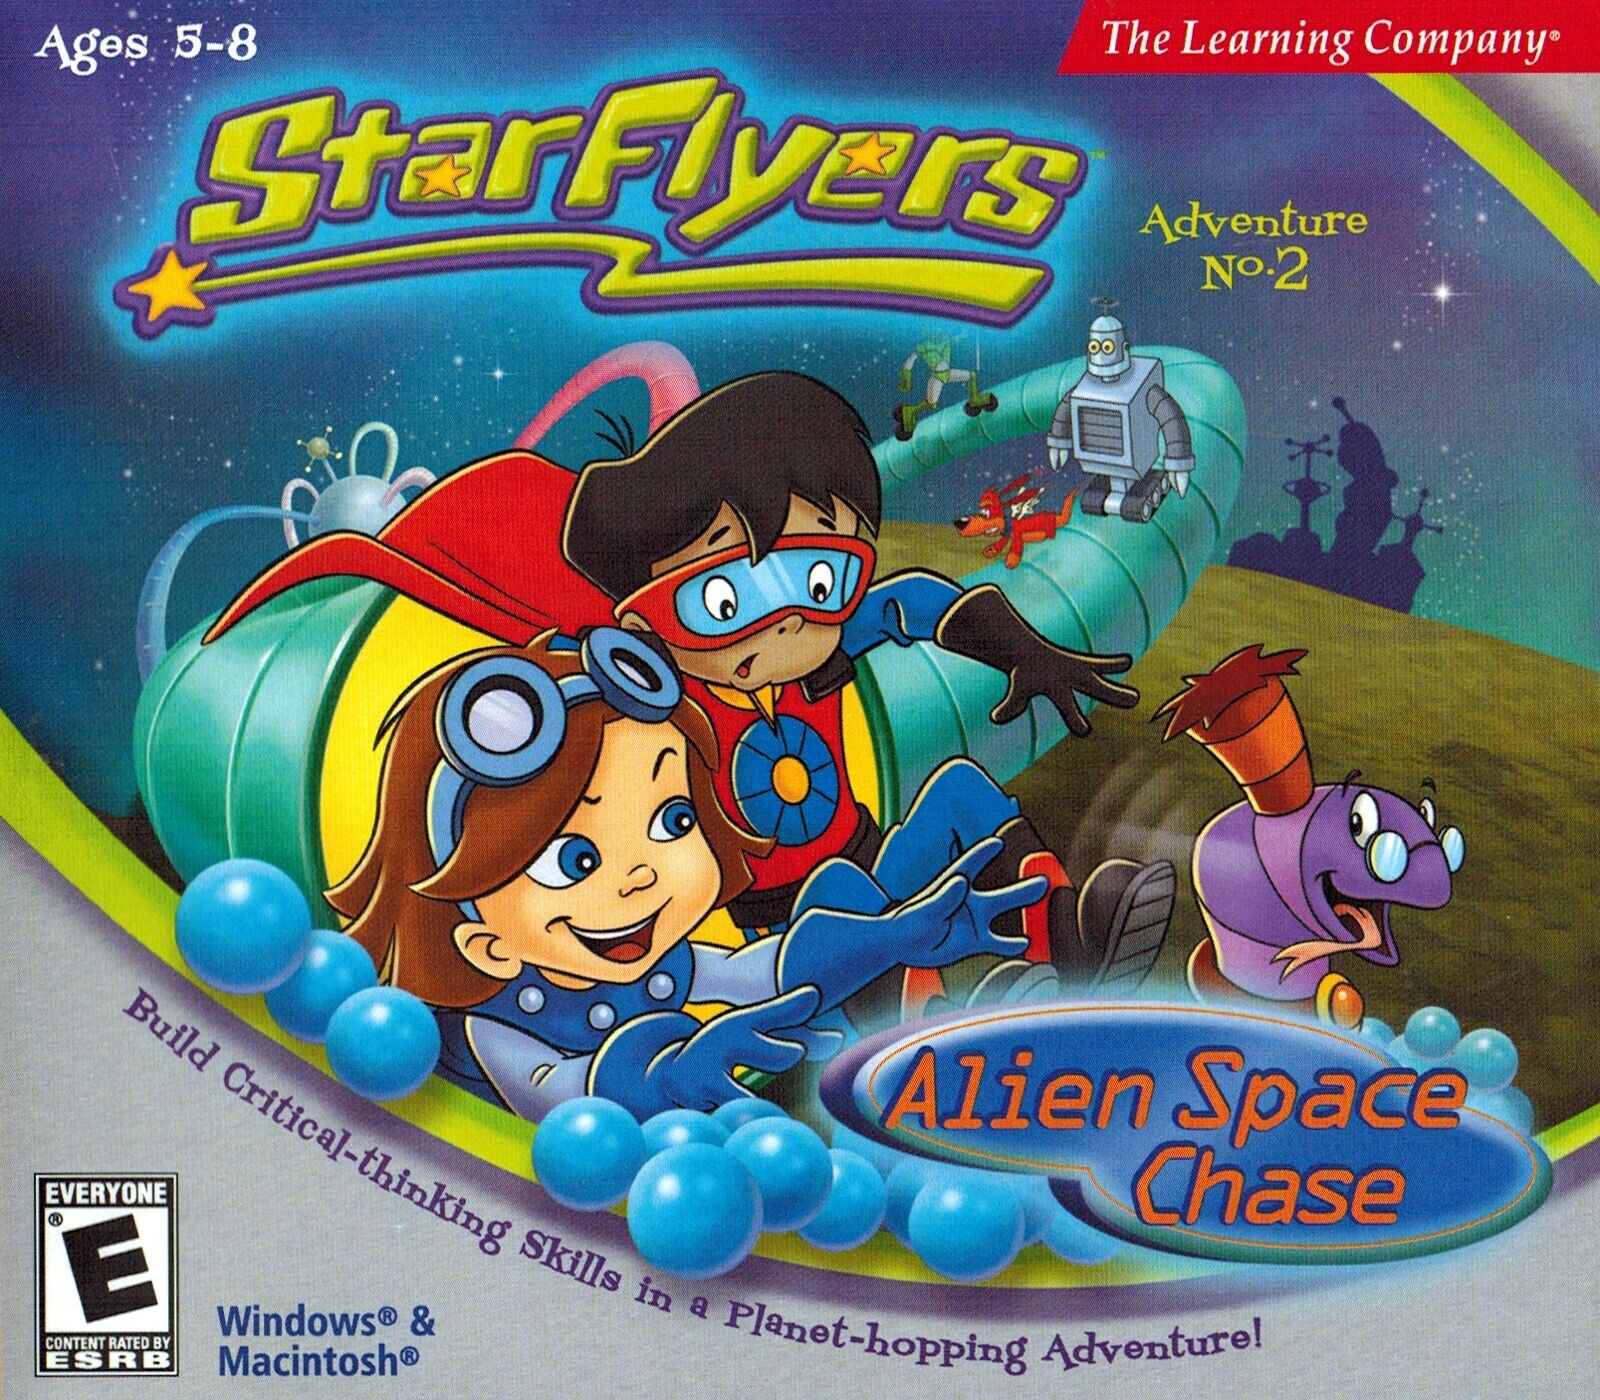 Star Flyers Adventure No. 2 Alien Space Chase Ages 5-8 Learning Company Sealed